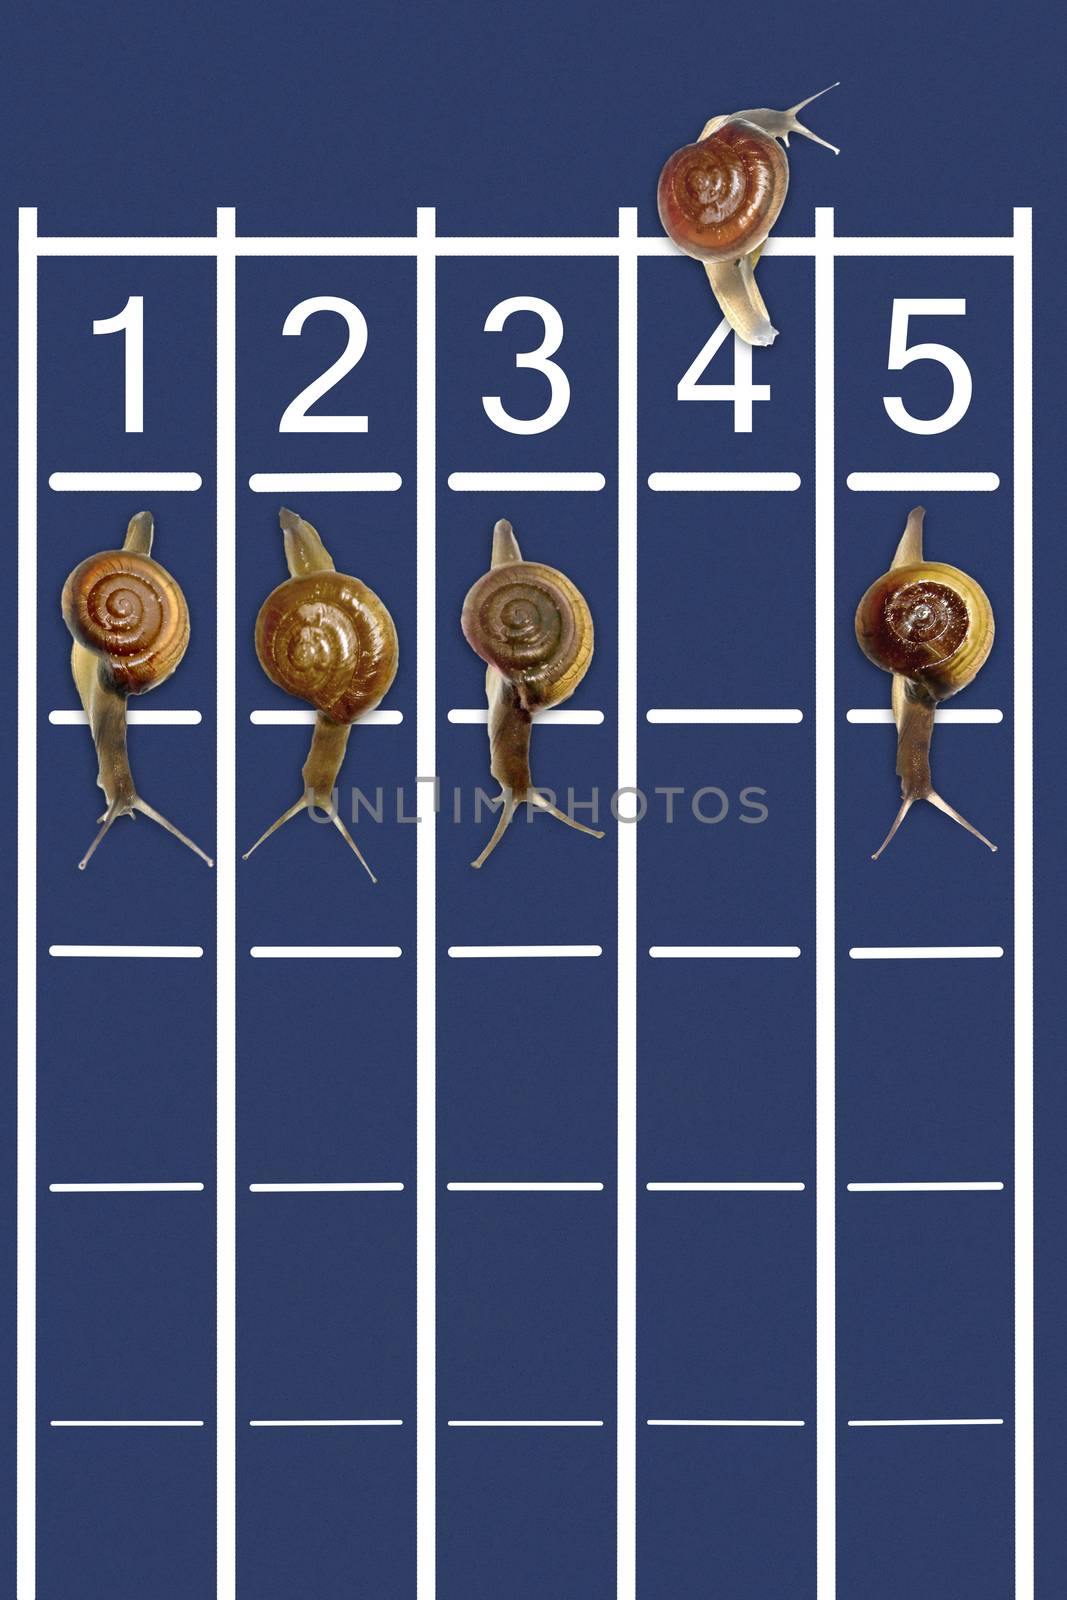 Snails running on track with one snail going backwords  by yands